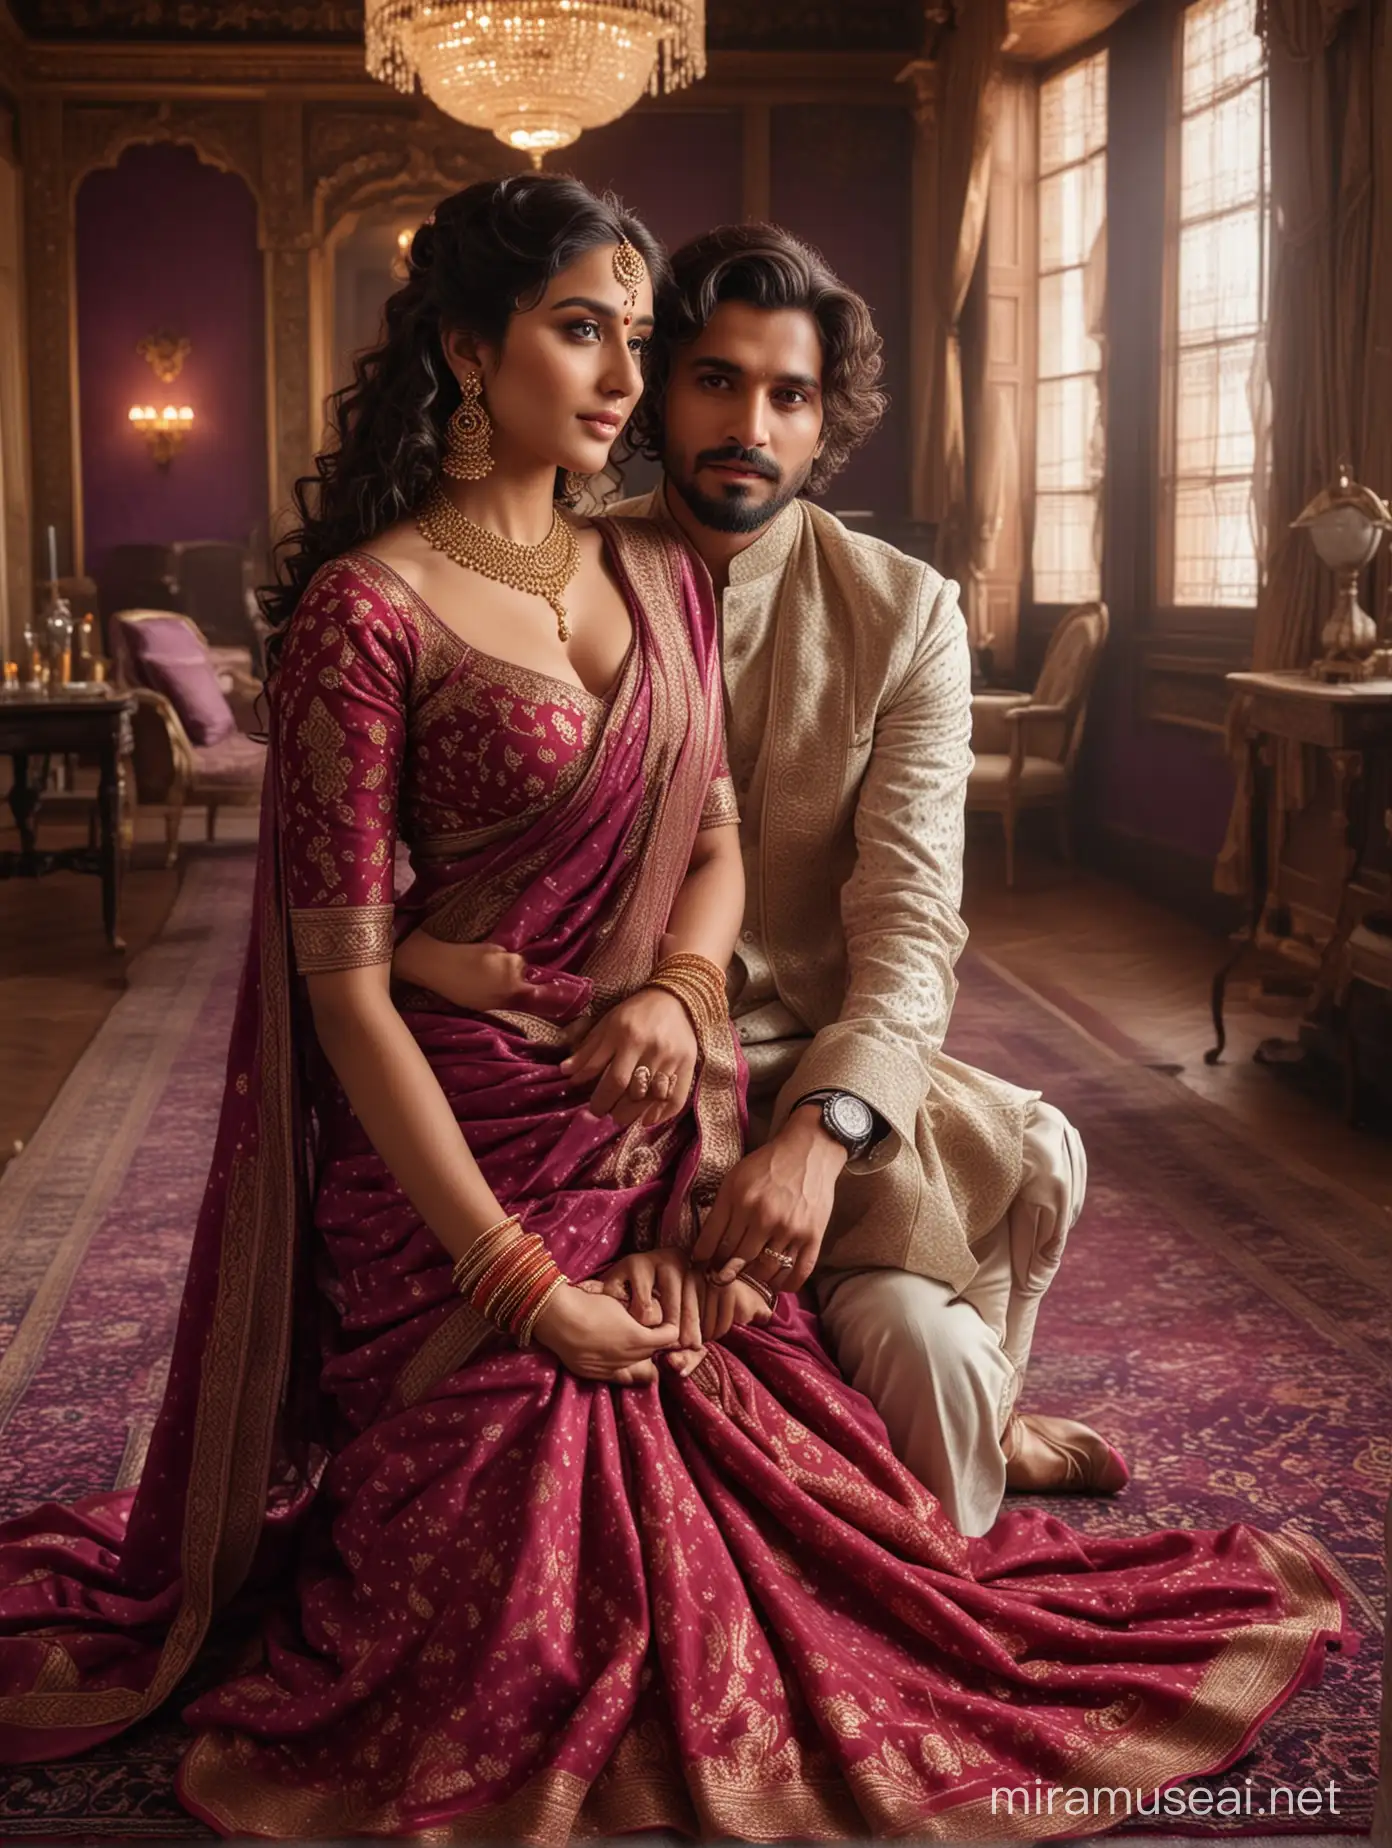 Romantic Indian Couple in Traditional Attire with Vintage Palace Ambiance